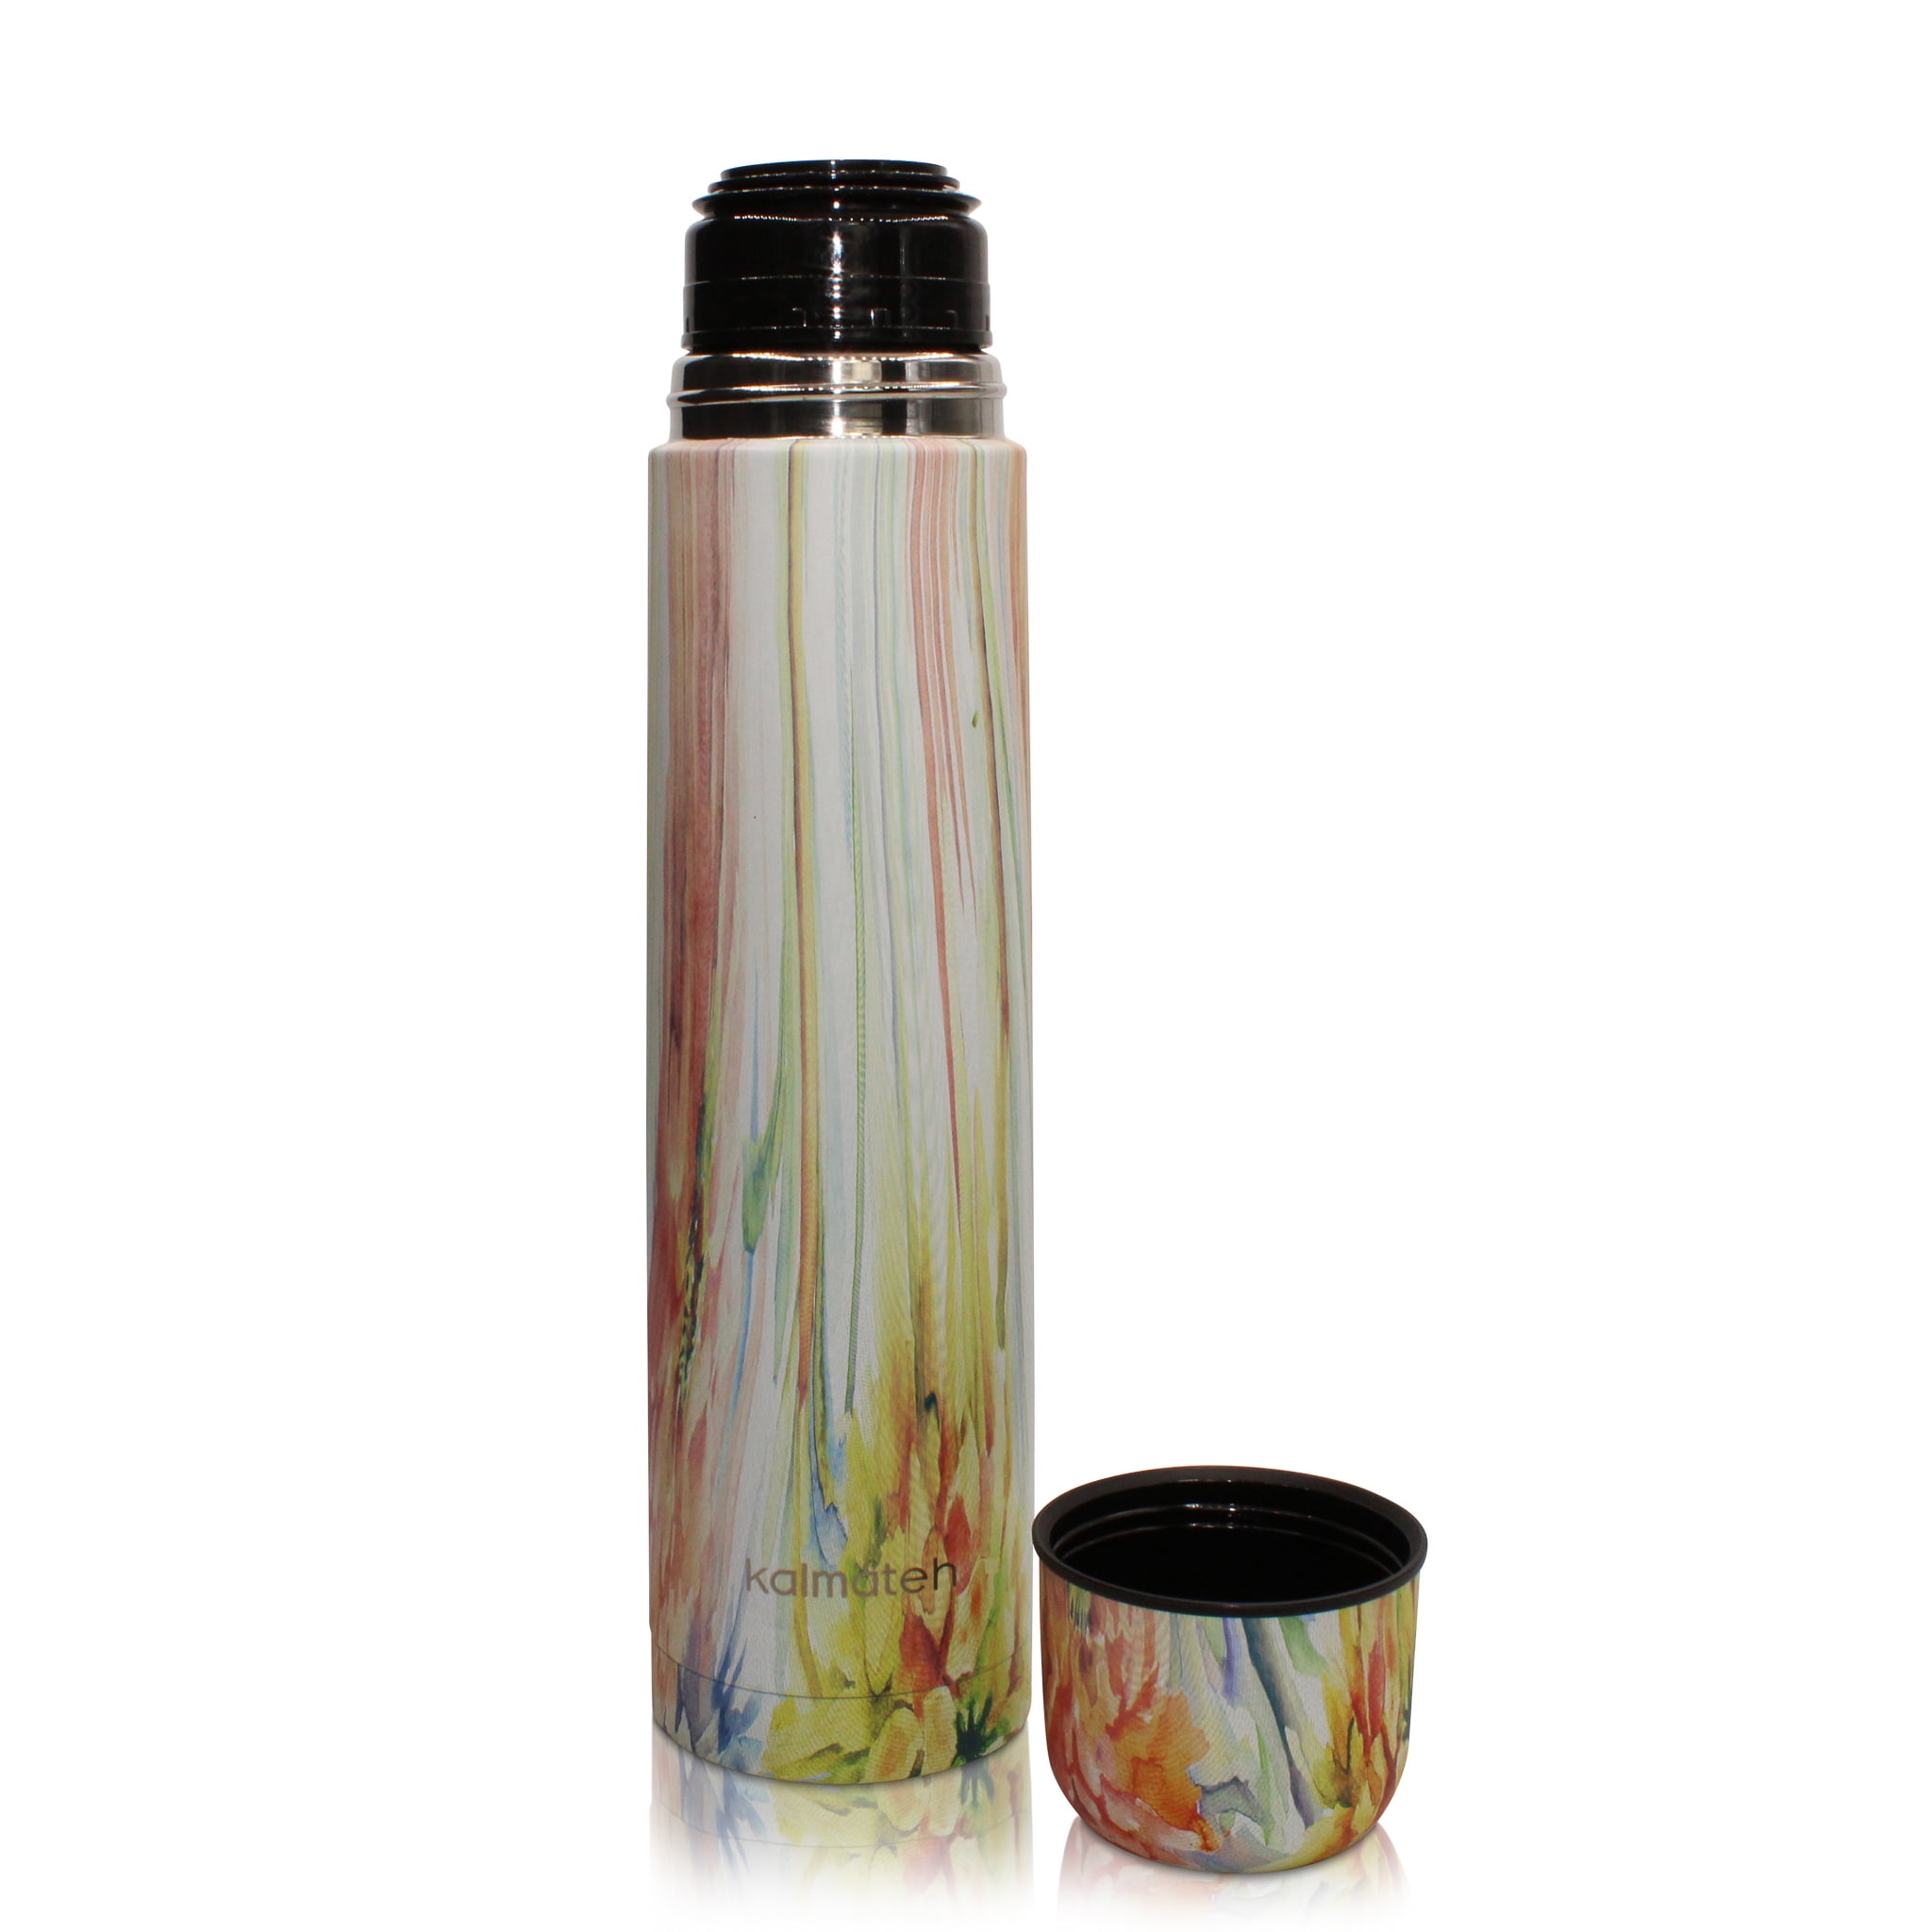 Kalmateh Yerba Mate Gourd and Thermos Set- Small Yerba Mate Gourd 5oz, Vacuum Insulated Mate Thermos 760ml, Bombilla Filter Straw and Cleaning Brush